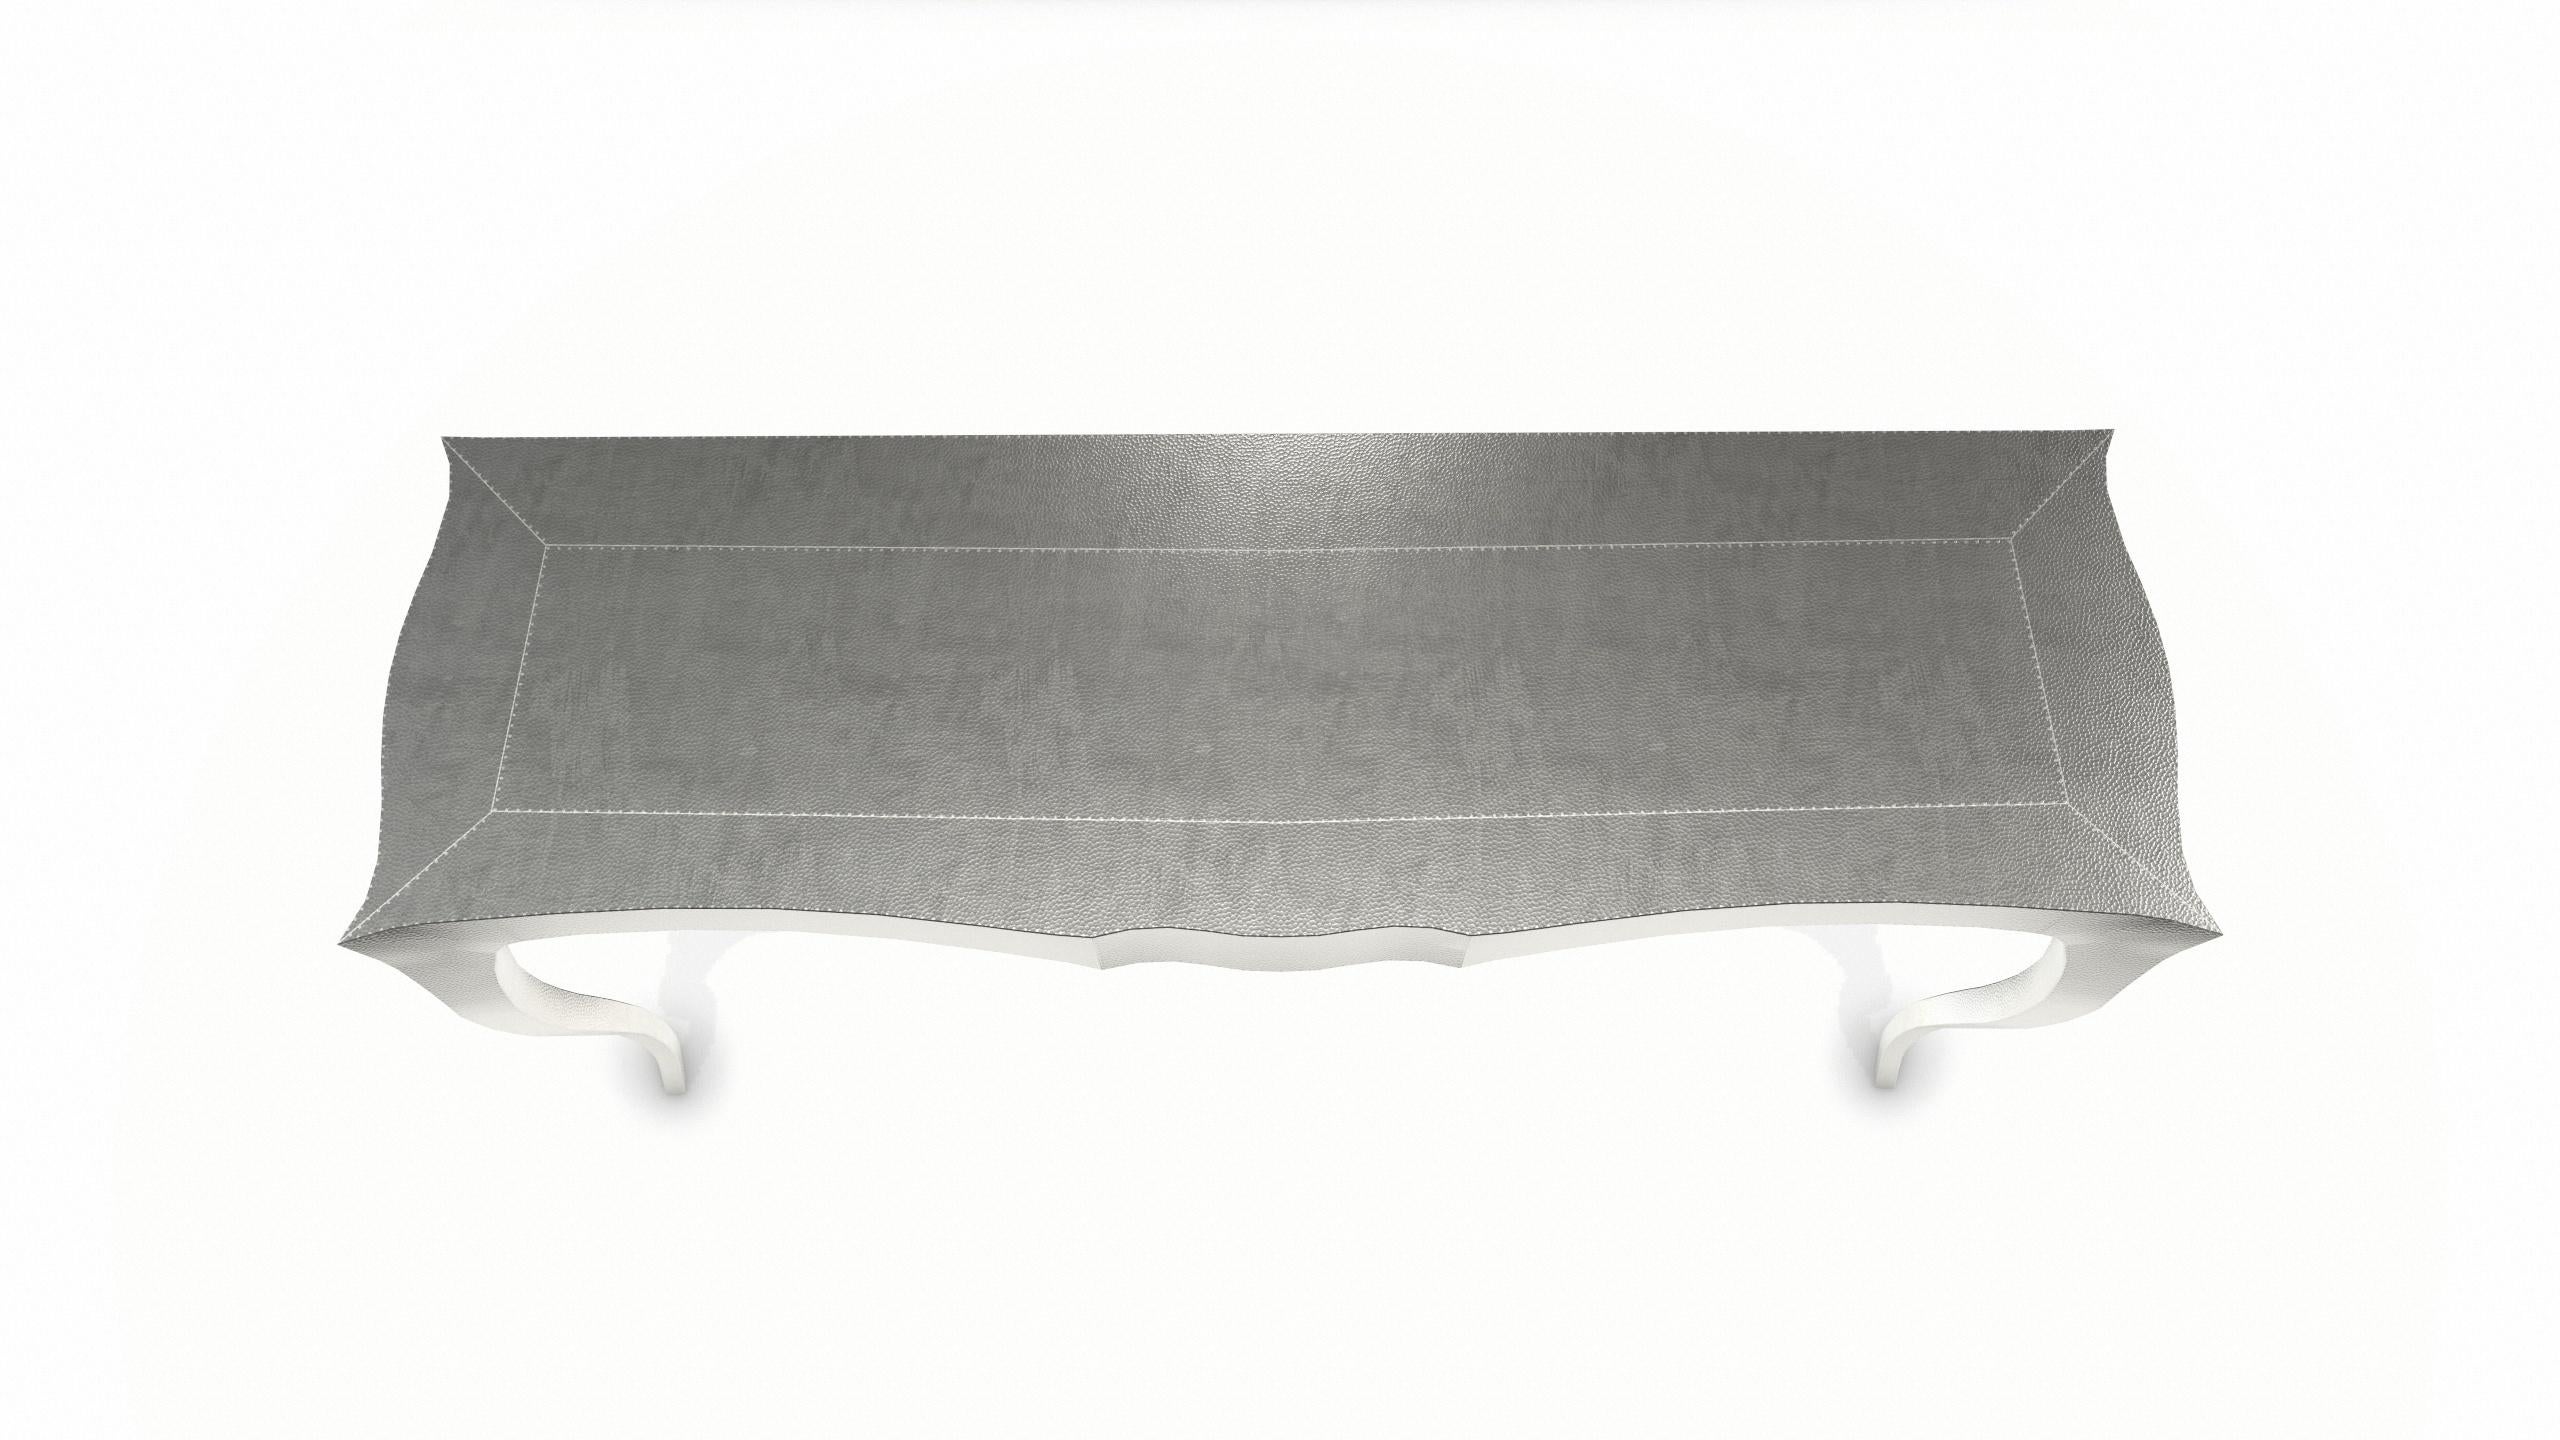 Metal Louise Console Art Nouveau Tray Table Mid. Hammered White Bronze by Paul Mathieu For Sale